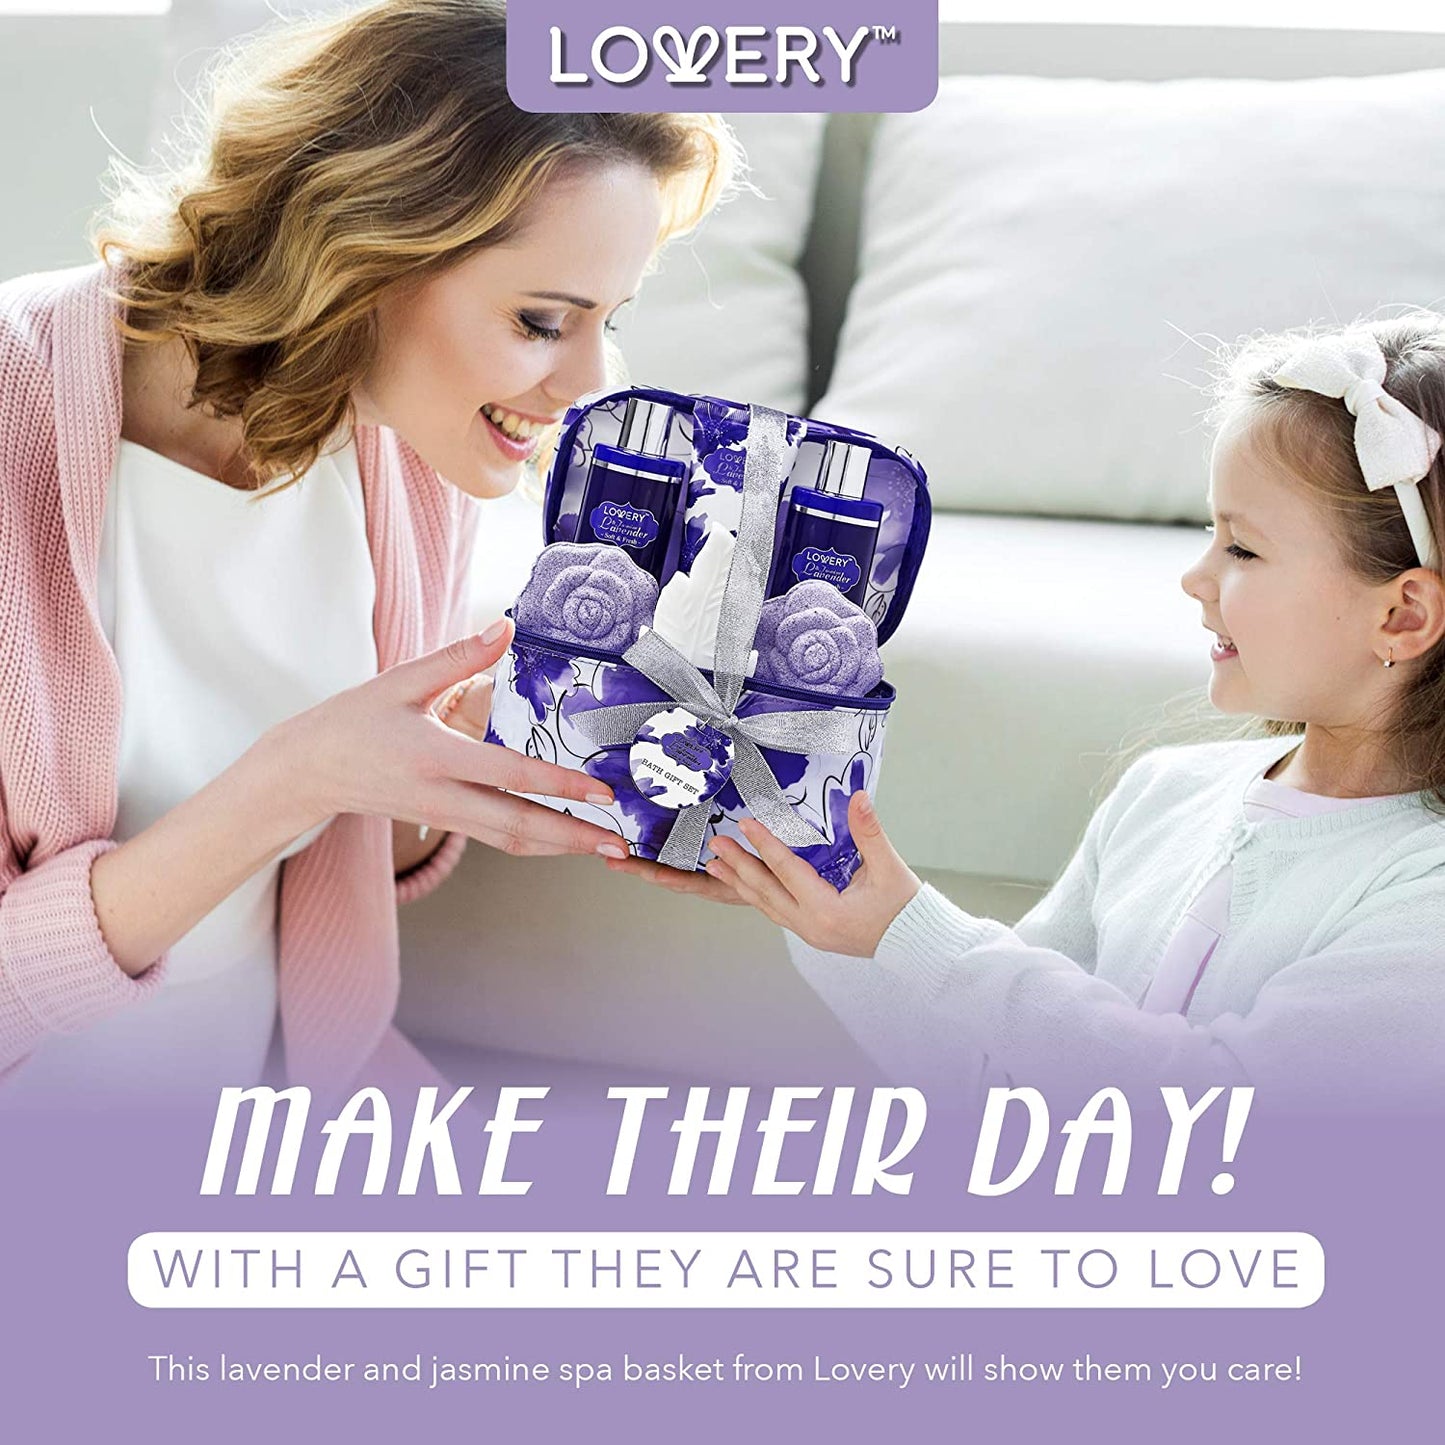 Lovery bath gift set featuring Lavender & Jasmine Spa Set. Luxury Body Care Collection with Exquisite Bath Aromas and Soothing Fragrance Essentials. 9-Piece Spa Gift in a Travel-Size Spa Kit. Lavender & Jasmine Beauty showcased in a Silver Display Bathtub Gift. Paraben-Free Spa Essentials that are also Cruelty-Free Spa Care